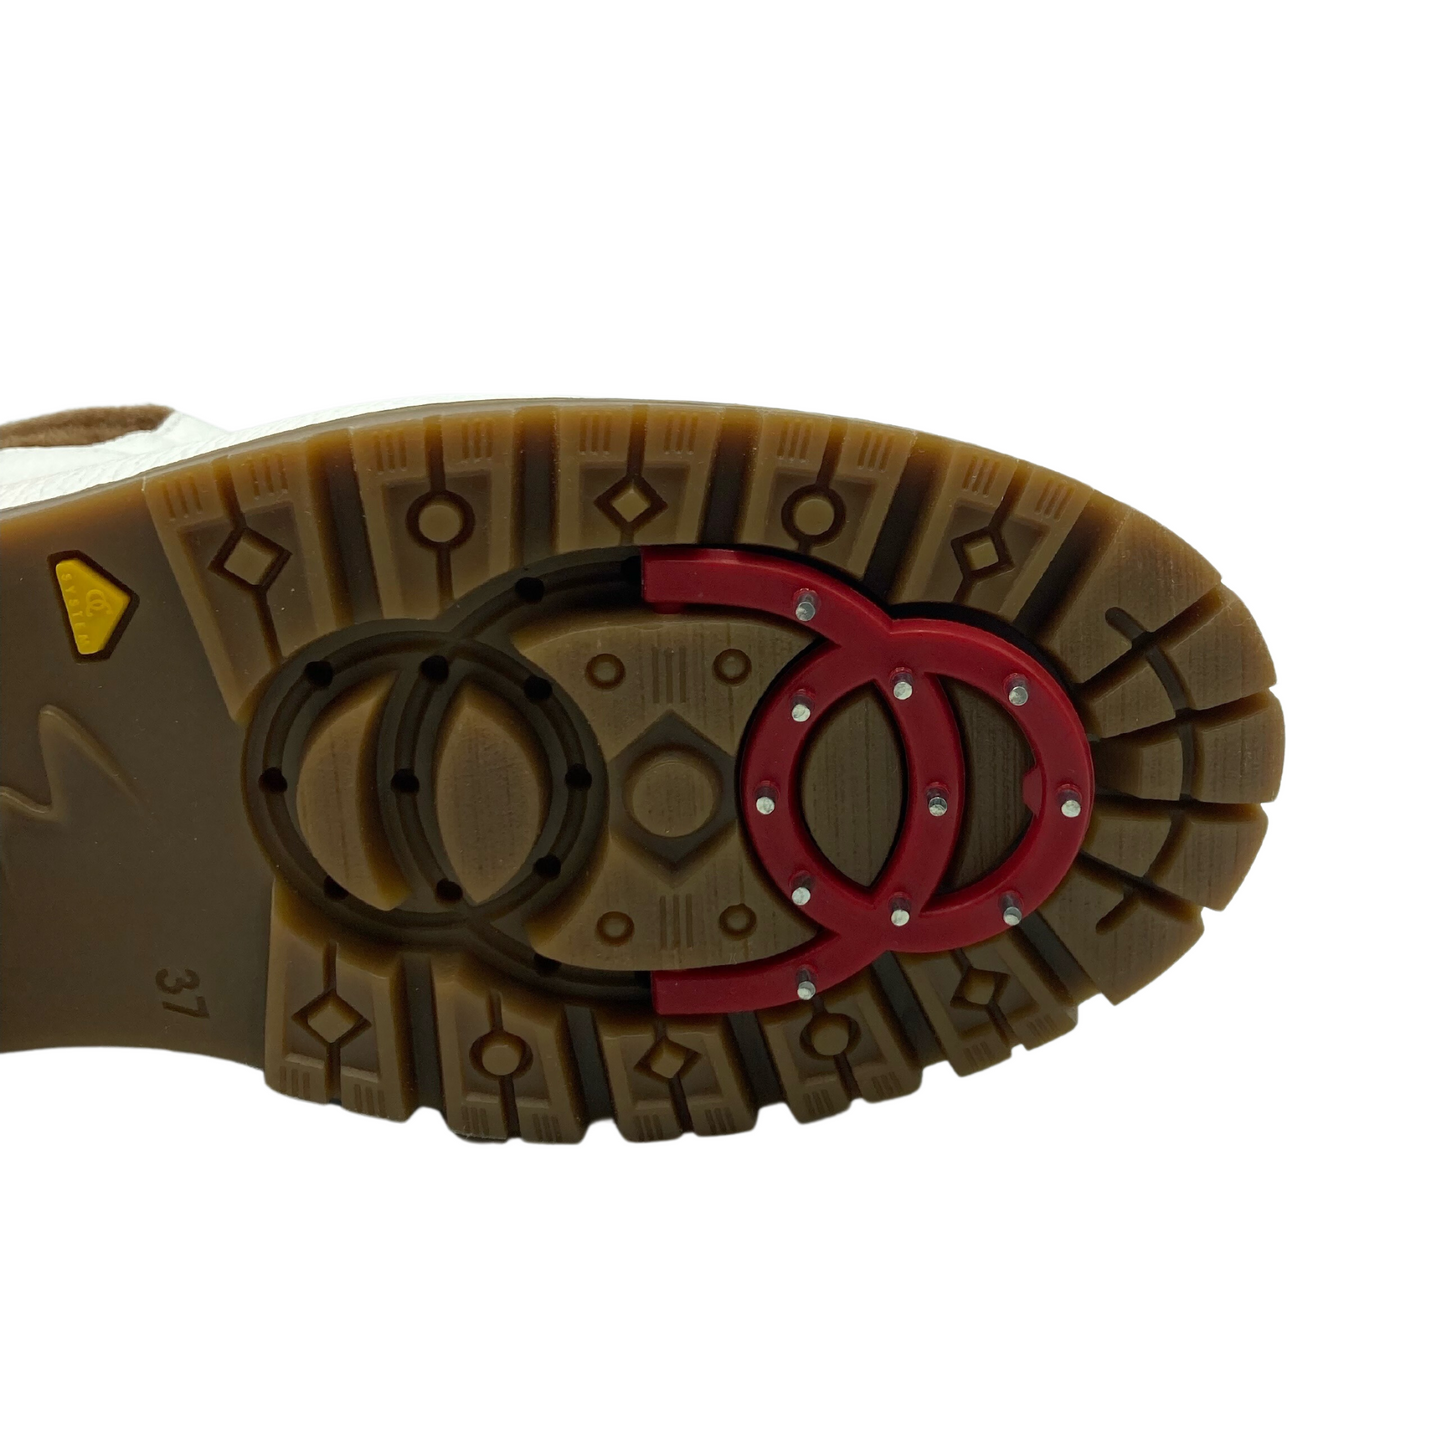 Close up view of rubber outsole with retractable spikes locked in place